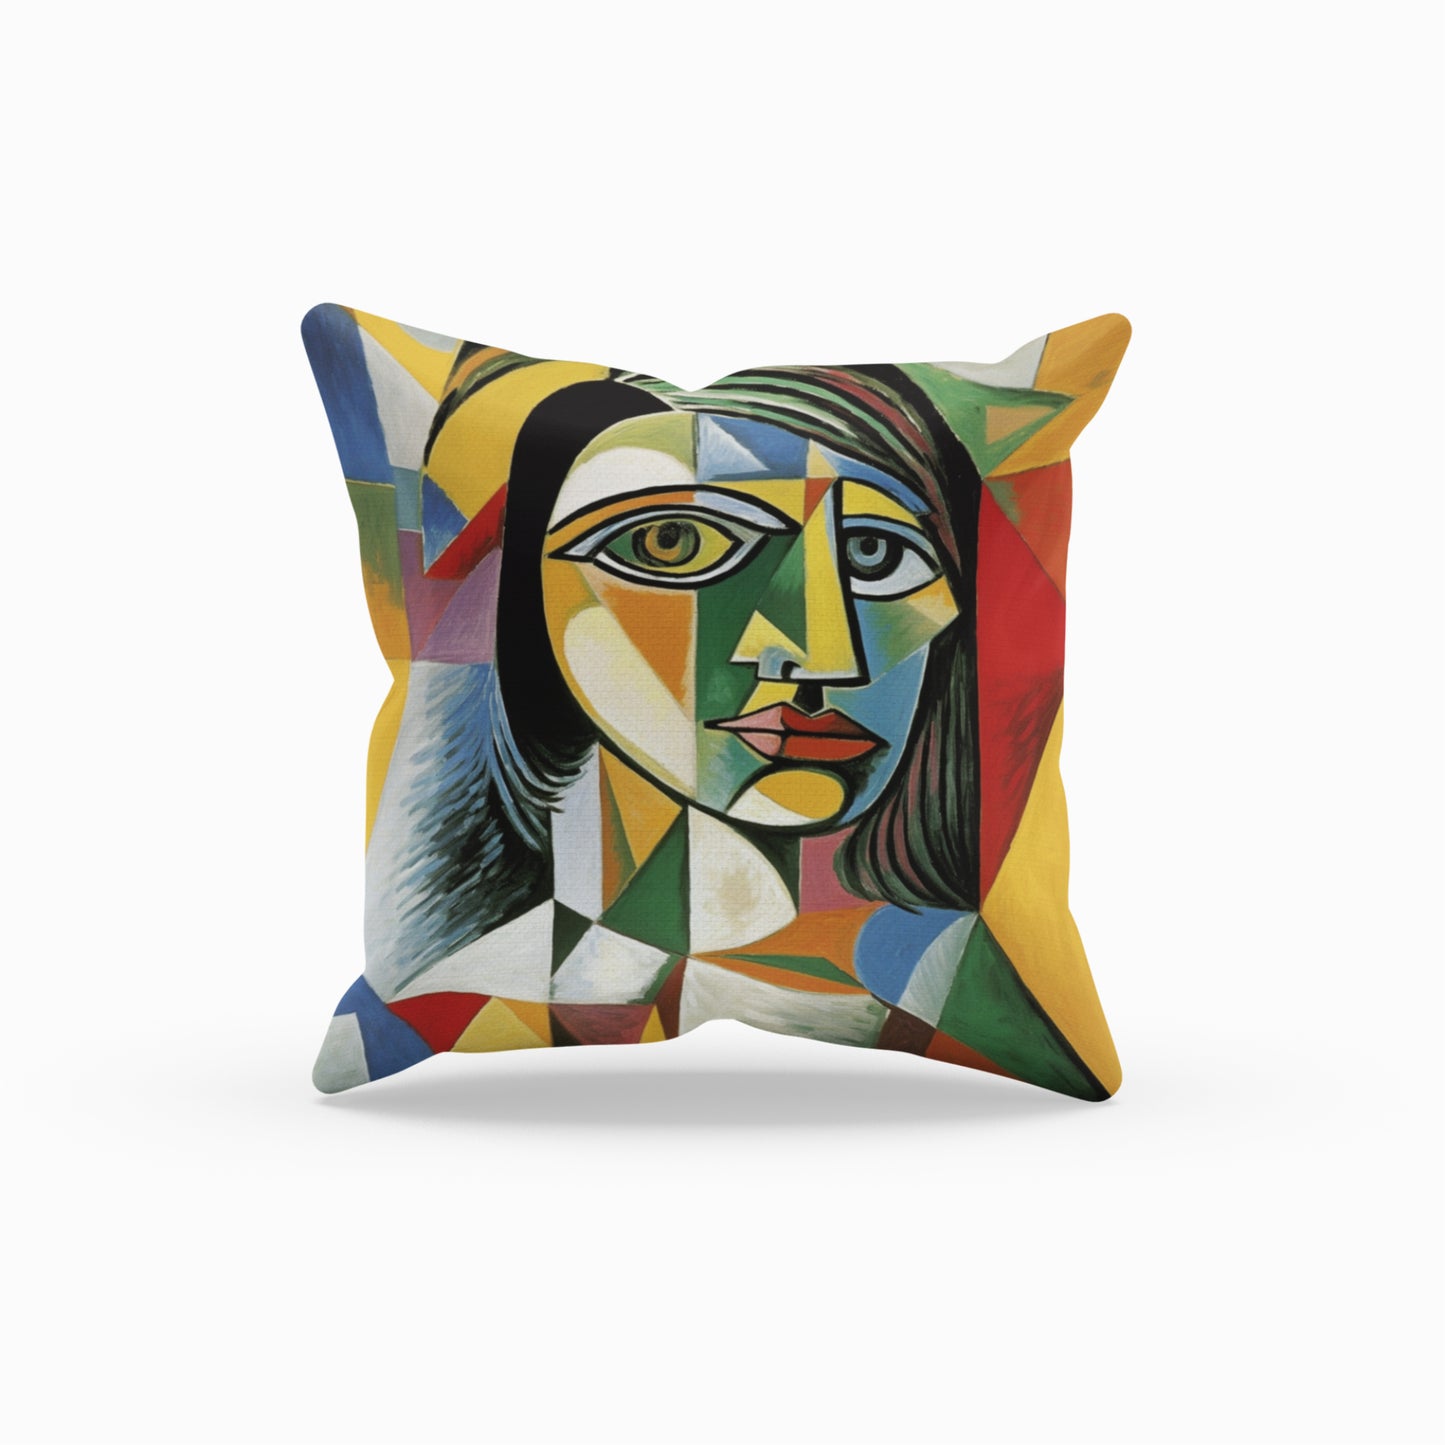 Homeezone's Abstract Face Theme Pillow